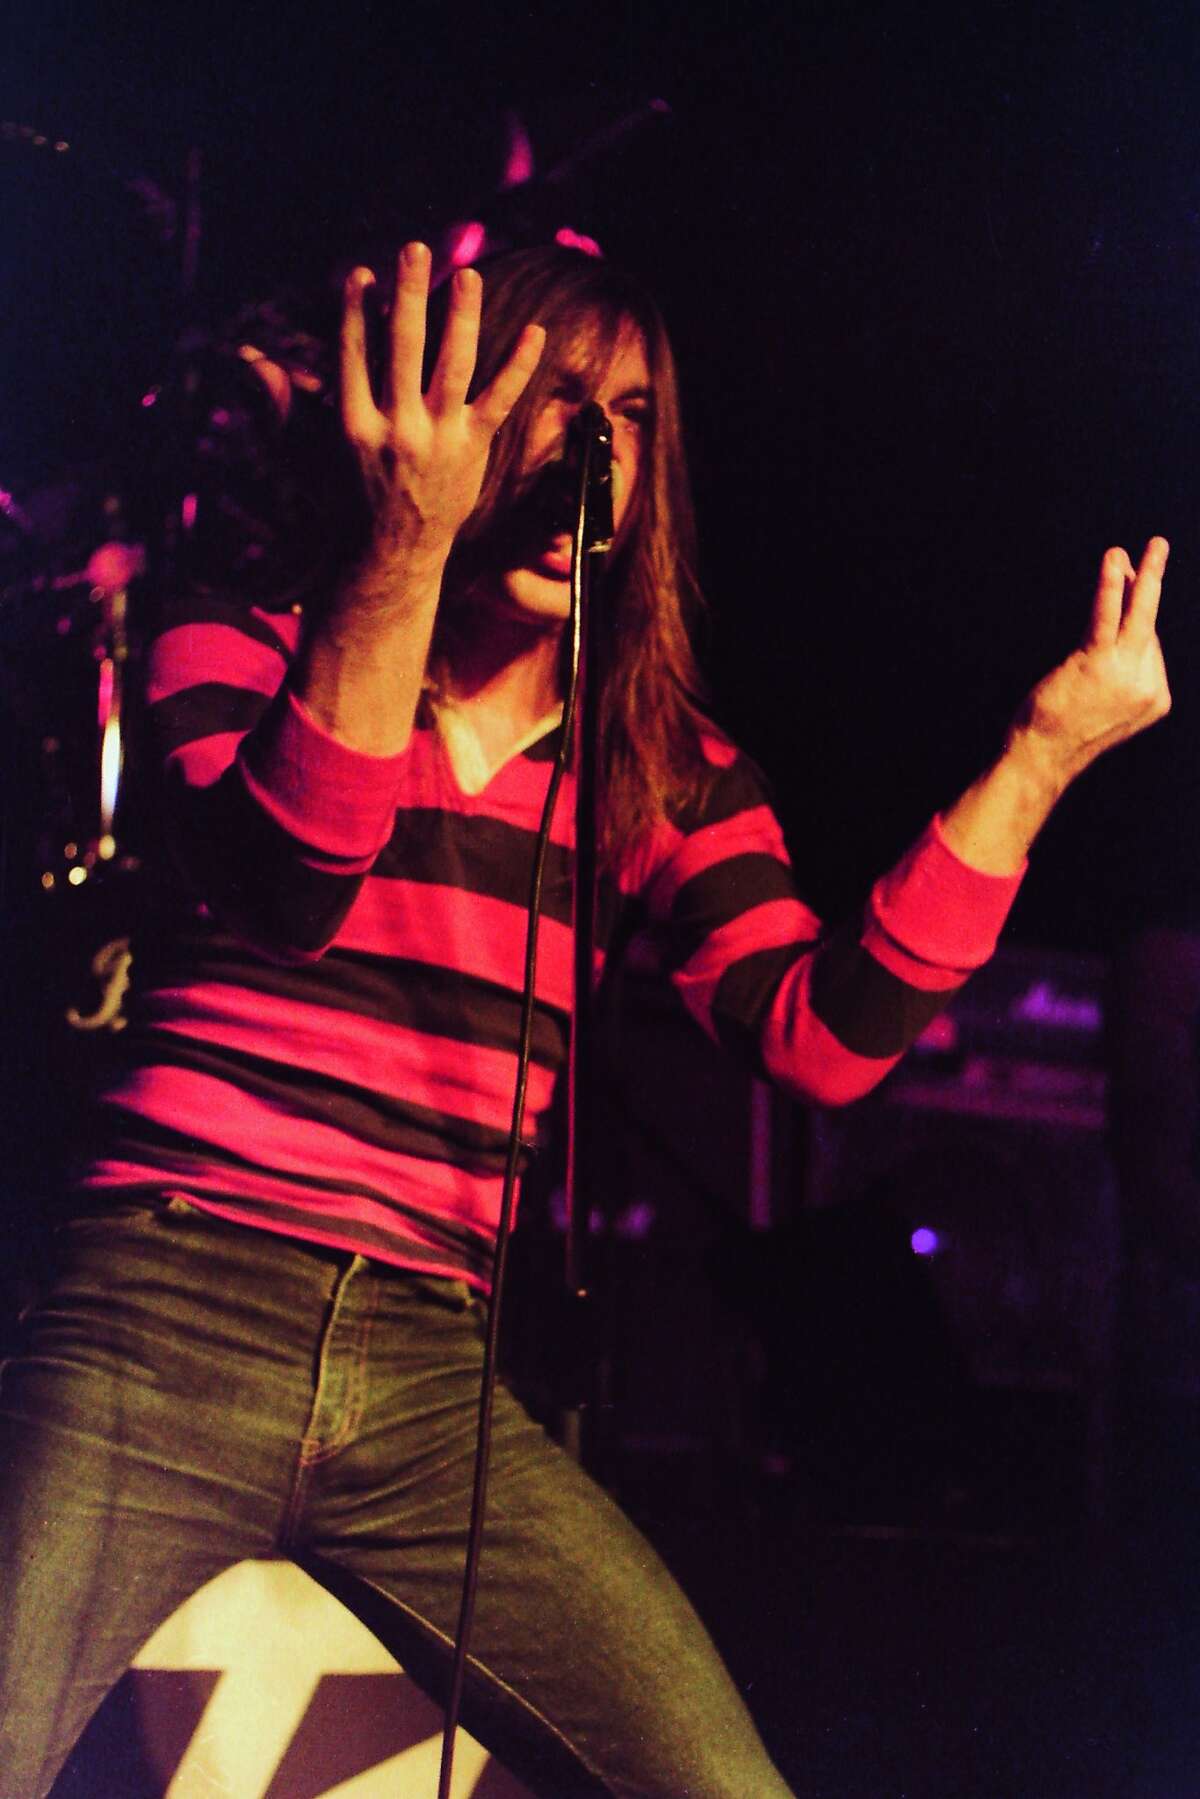 Long hair, stripes and jeans -- one uniform for heavy metal singers - as seen on Bruce Dickinson, who sang for Shots, Speed and Samson before joining Iron Maiden in the early 1980s. He's had a three-decade career with the band that included a short separation for several solo albums.